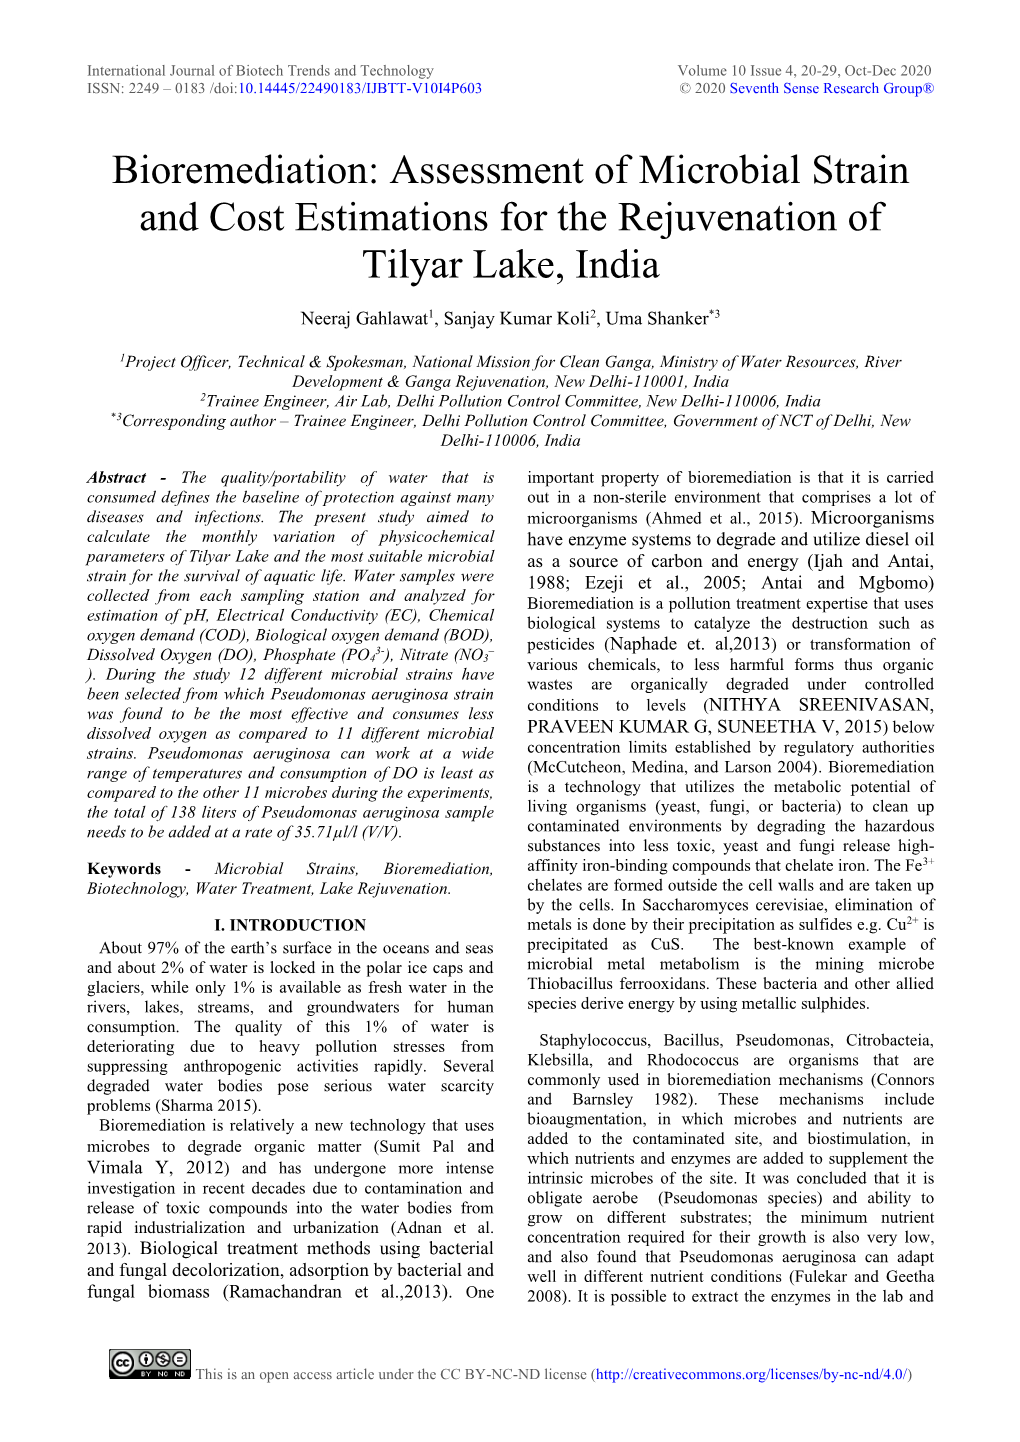 Bioremediation: Assessment of Microbial Strain and Cost Estimations for the Rejuvenation of Tilyar Lake, India